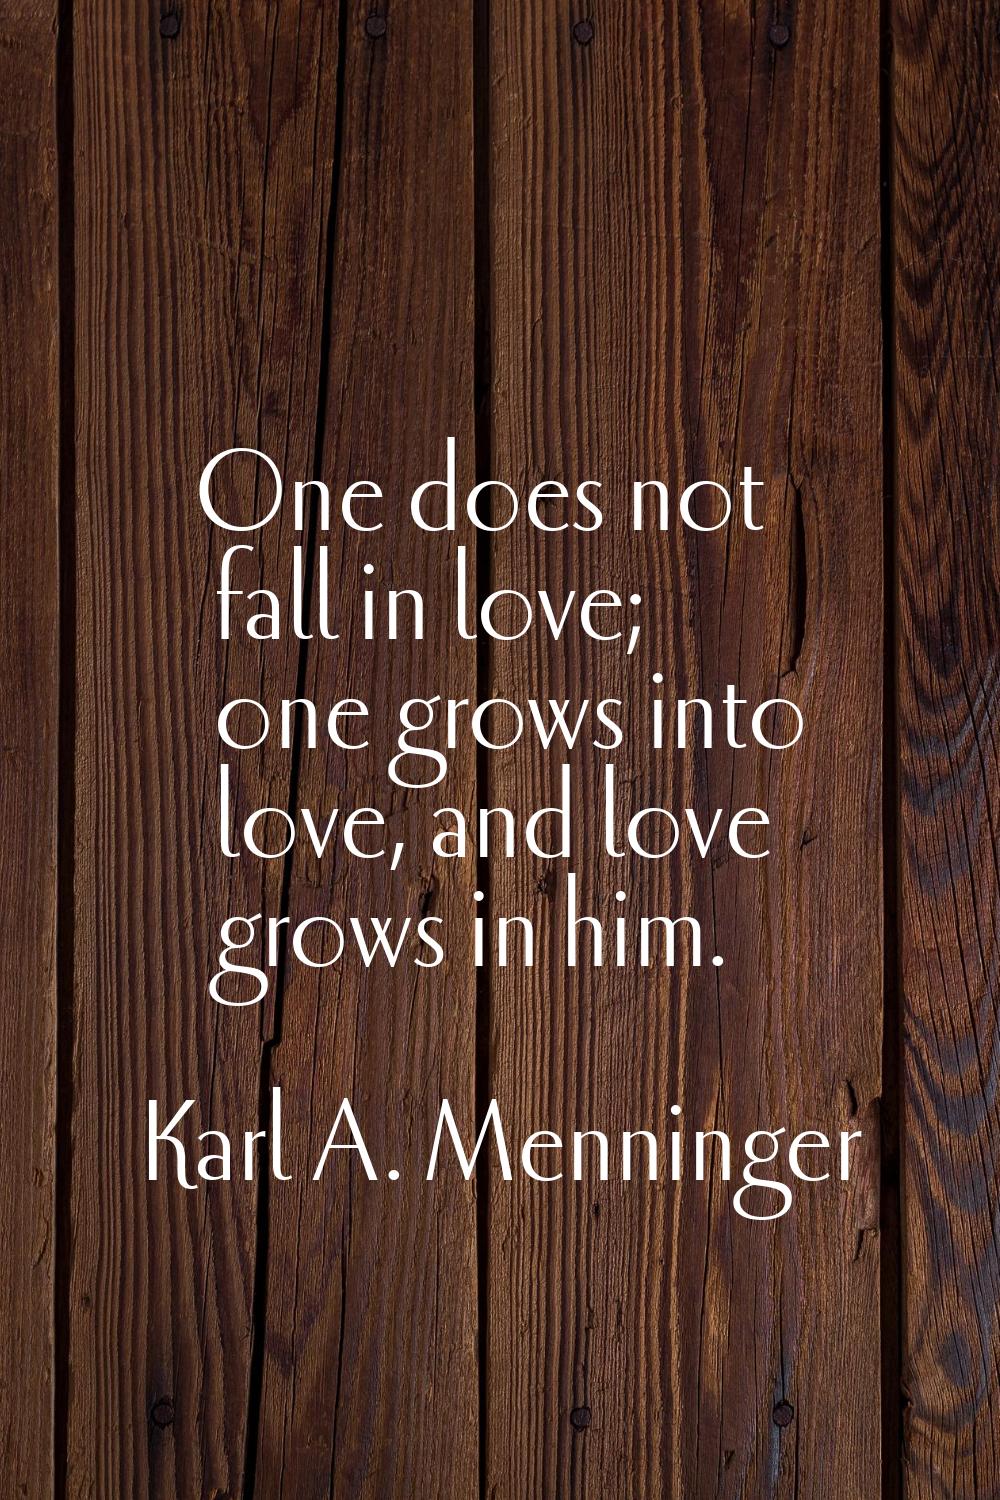 One does not fall in love; one grows into love, and love grows in him.